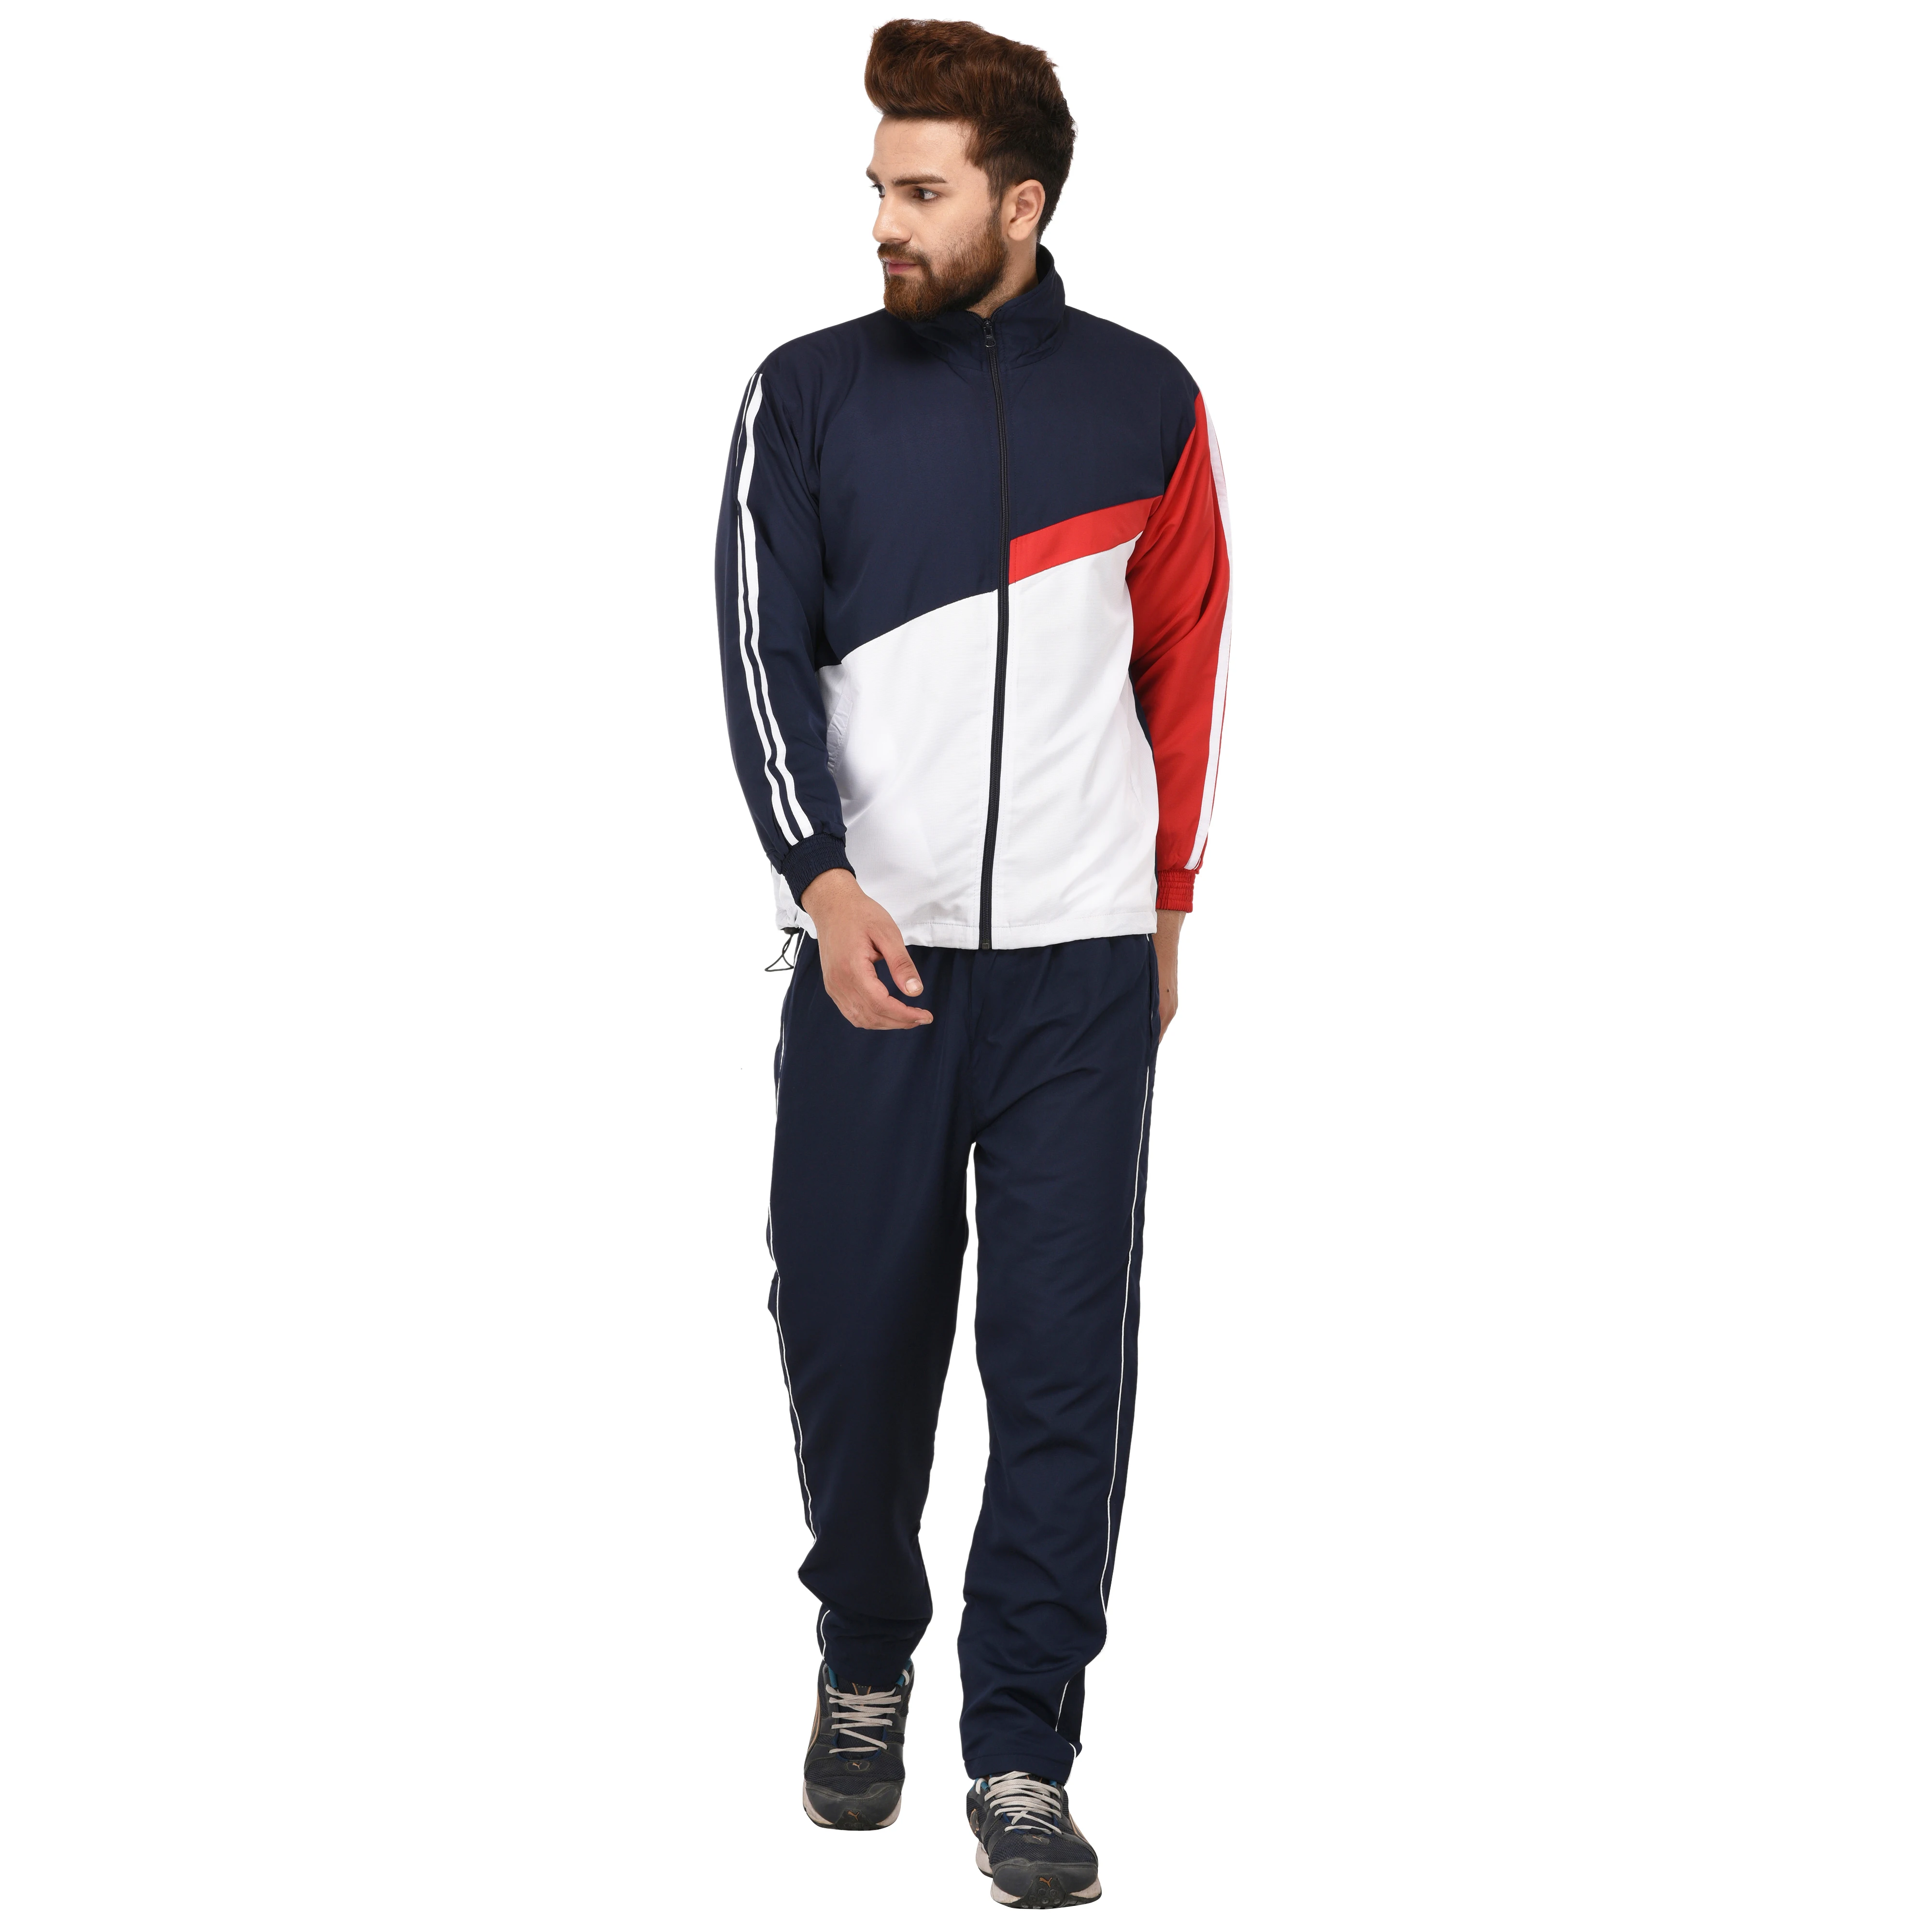 Warm Up Clothes Track Suit Buy Warm Up Clothes Custom Team Warm Up Suits Ethiopia Track Suit Product On Alibaba Com